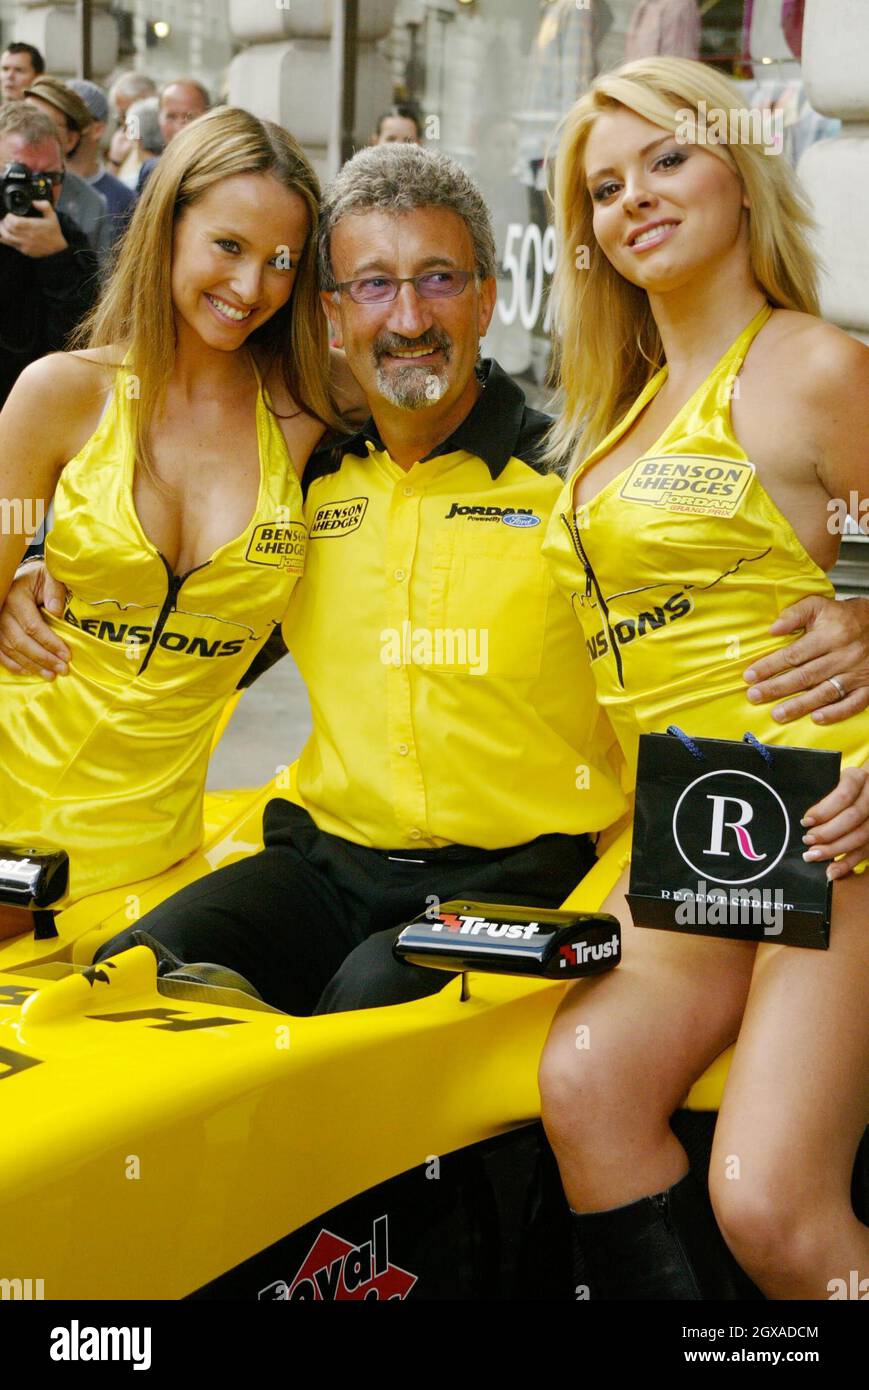 Eddie Jordan with pit babes Michelle Clack (blonde) and Leah Newman (brunette). Together they launched the Regent Street Formula 1 taking place on 060704. The trio, who announced details of the